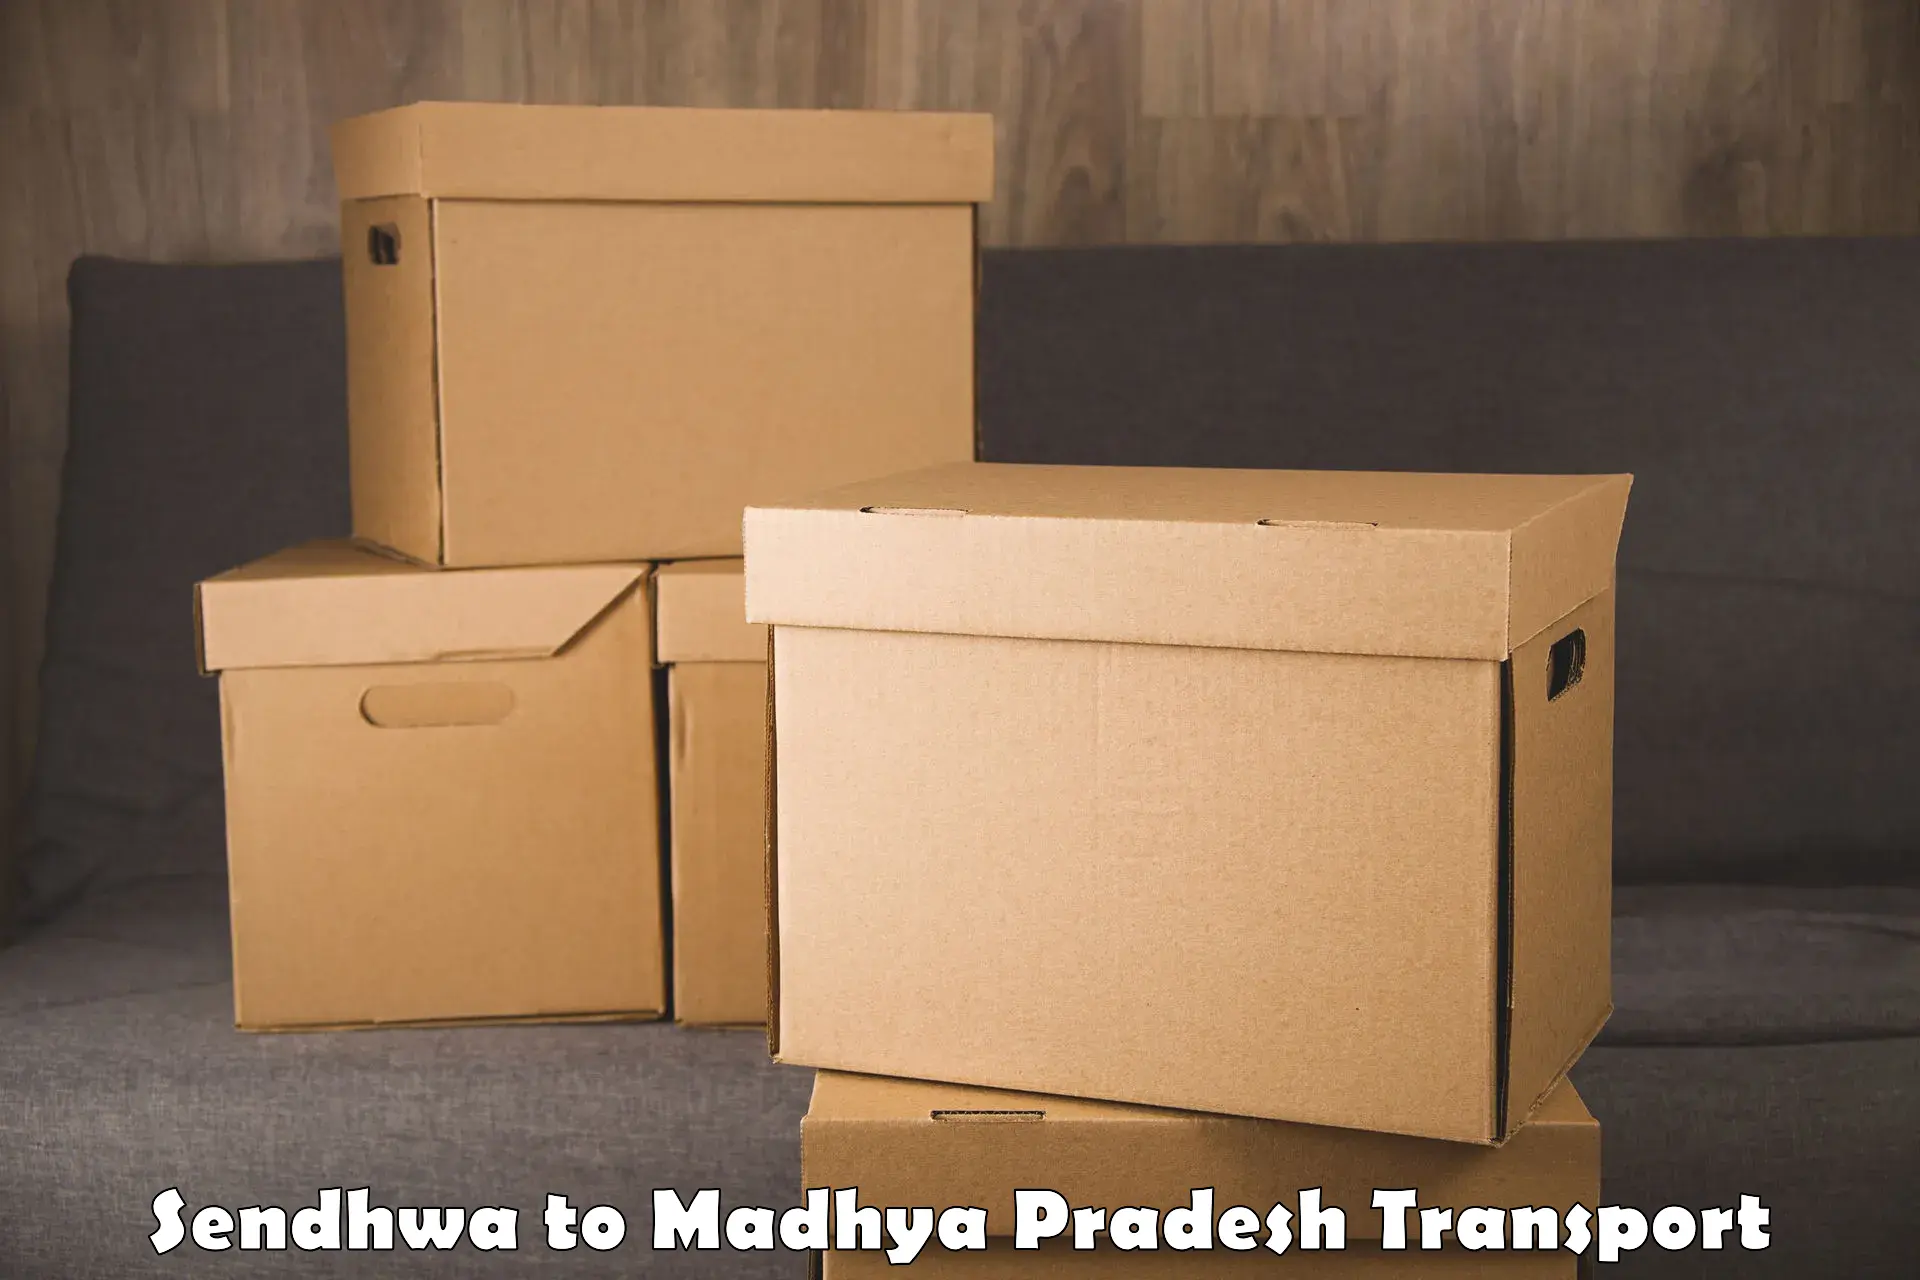 Daily transport service Sendhwa to Bhopal